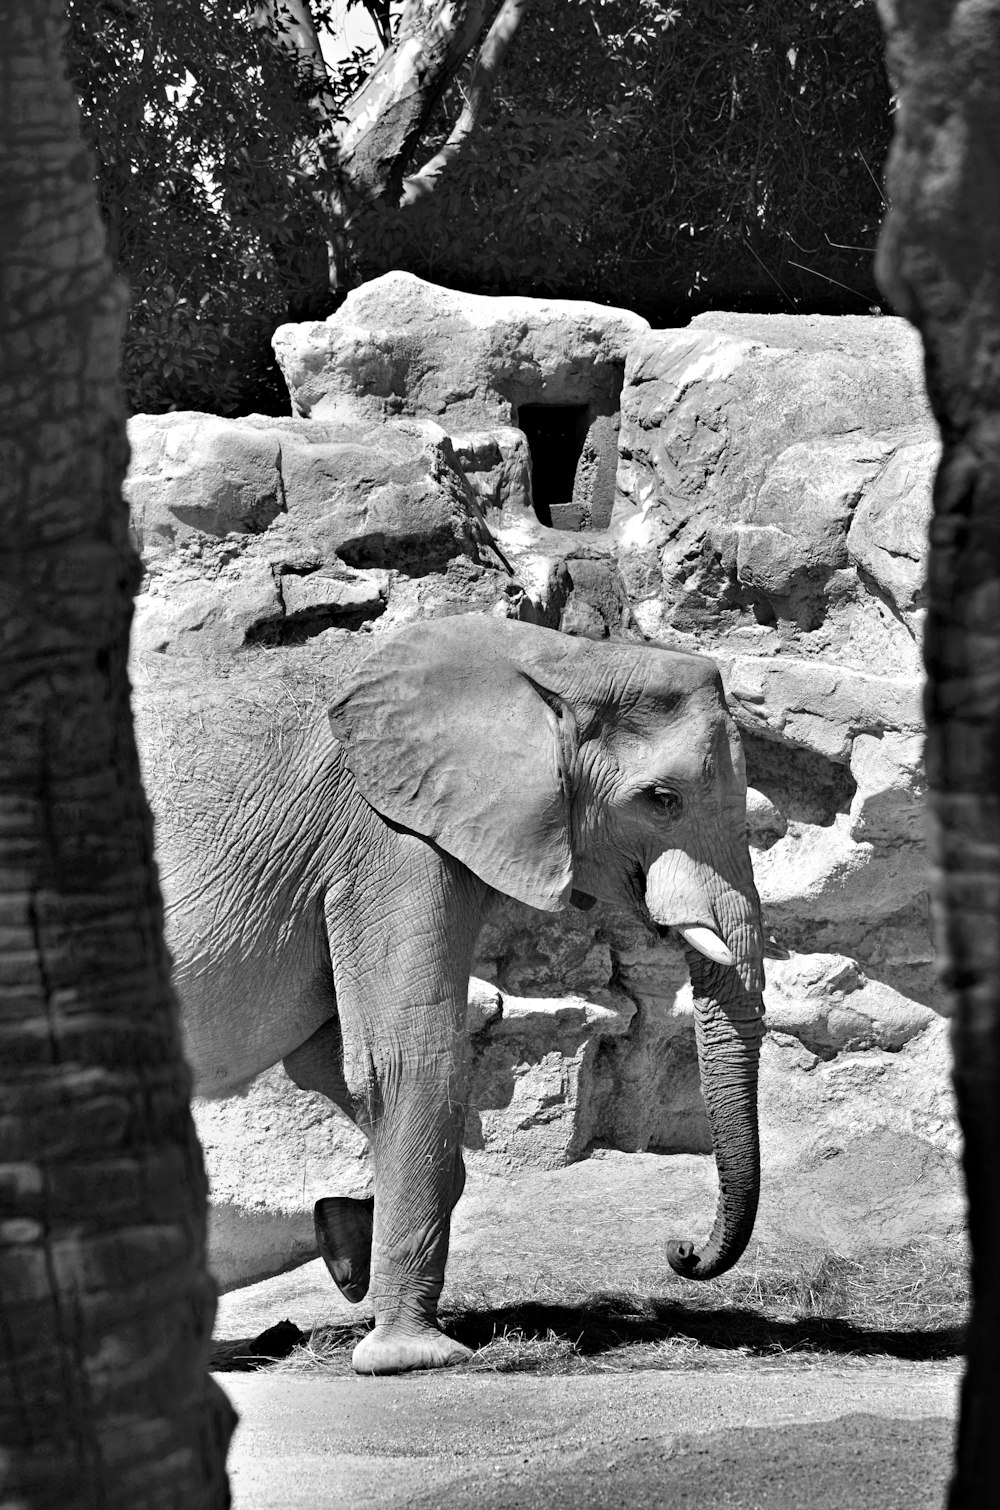 a large elephant standing next to a stone wall